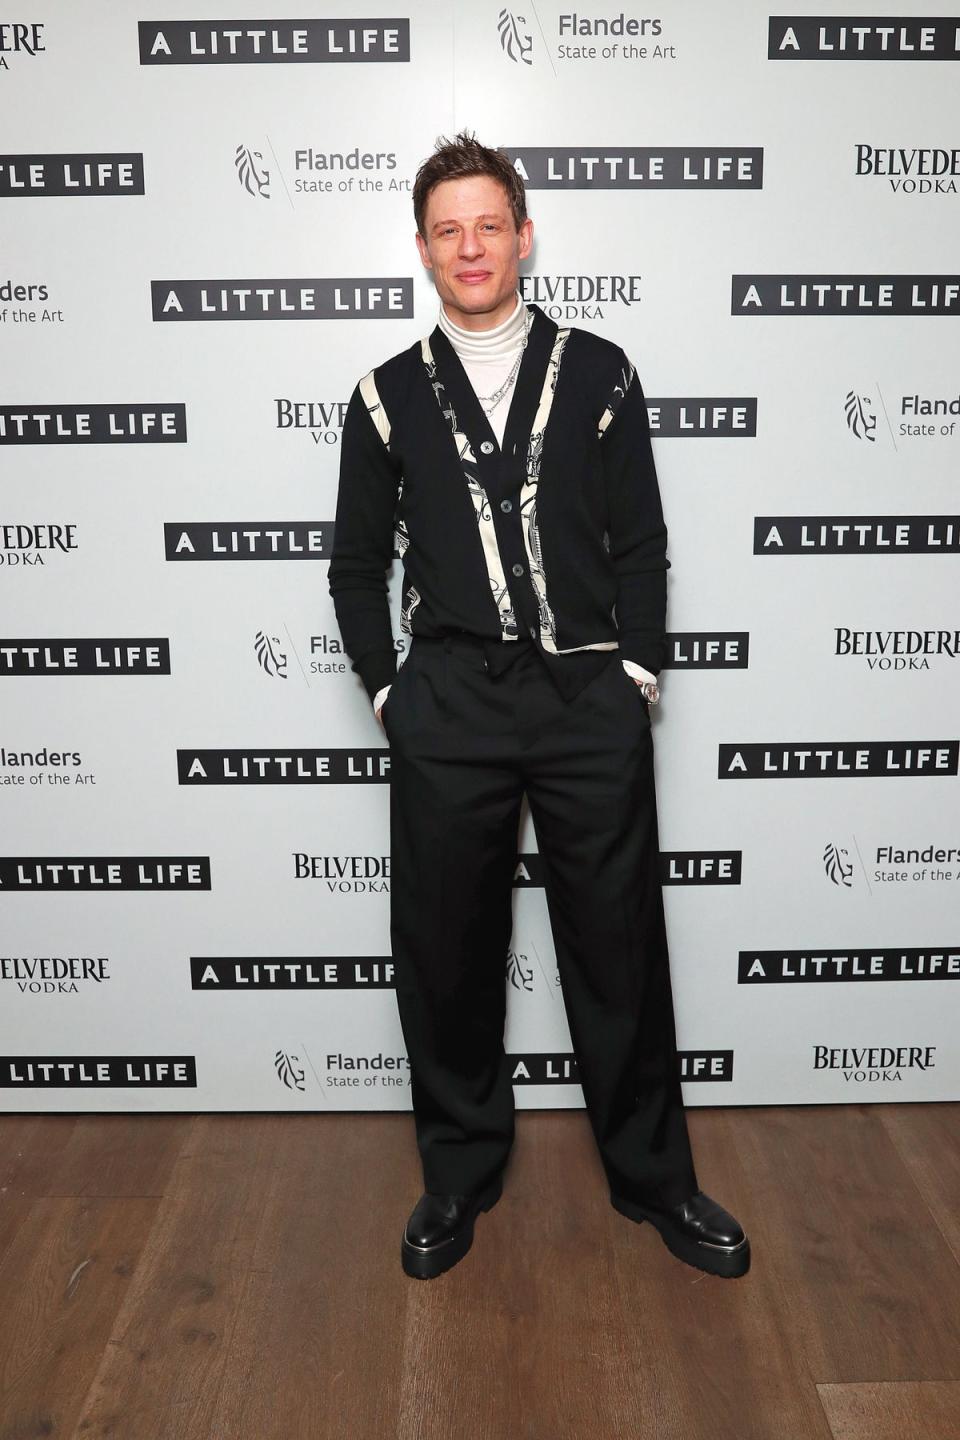 James Norton at the afterparty for this West End show A Little Life (Dave Benett)